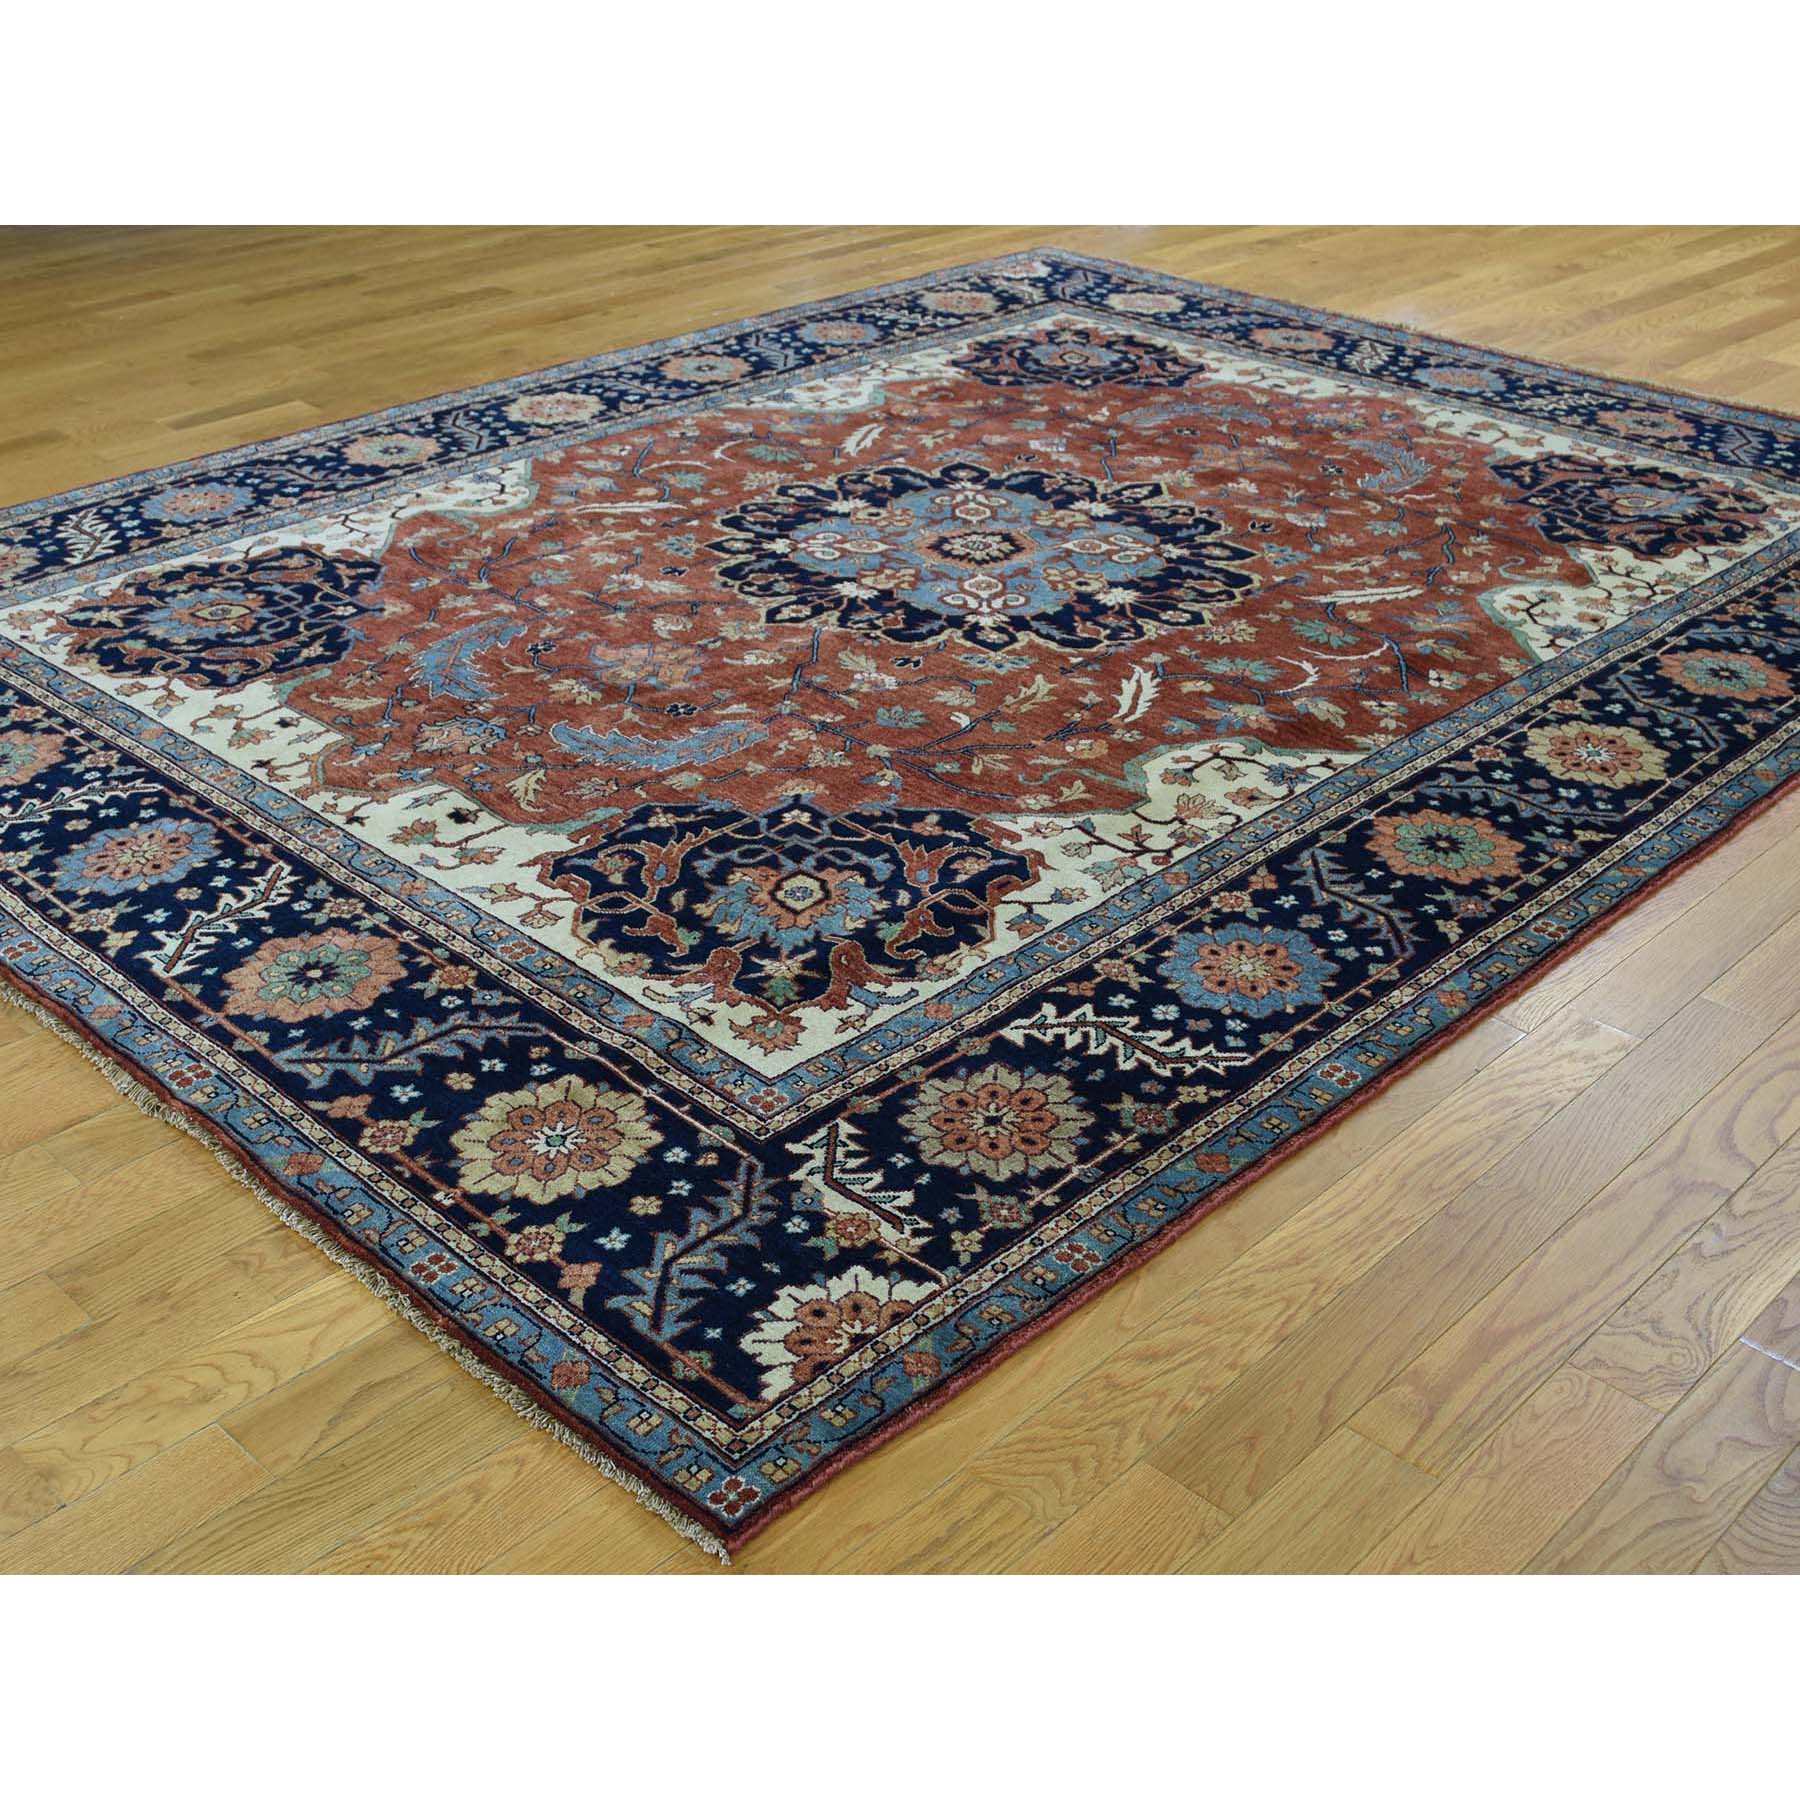 10-x13-10  Antiqued Heriz Re-creation Hand-Knotted Pure Wool Oriental Rug 